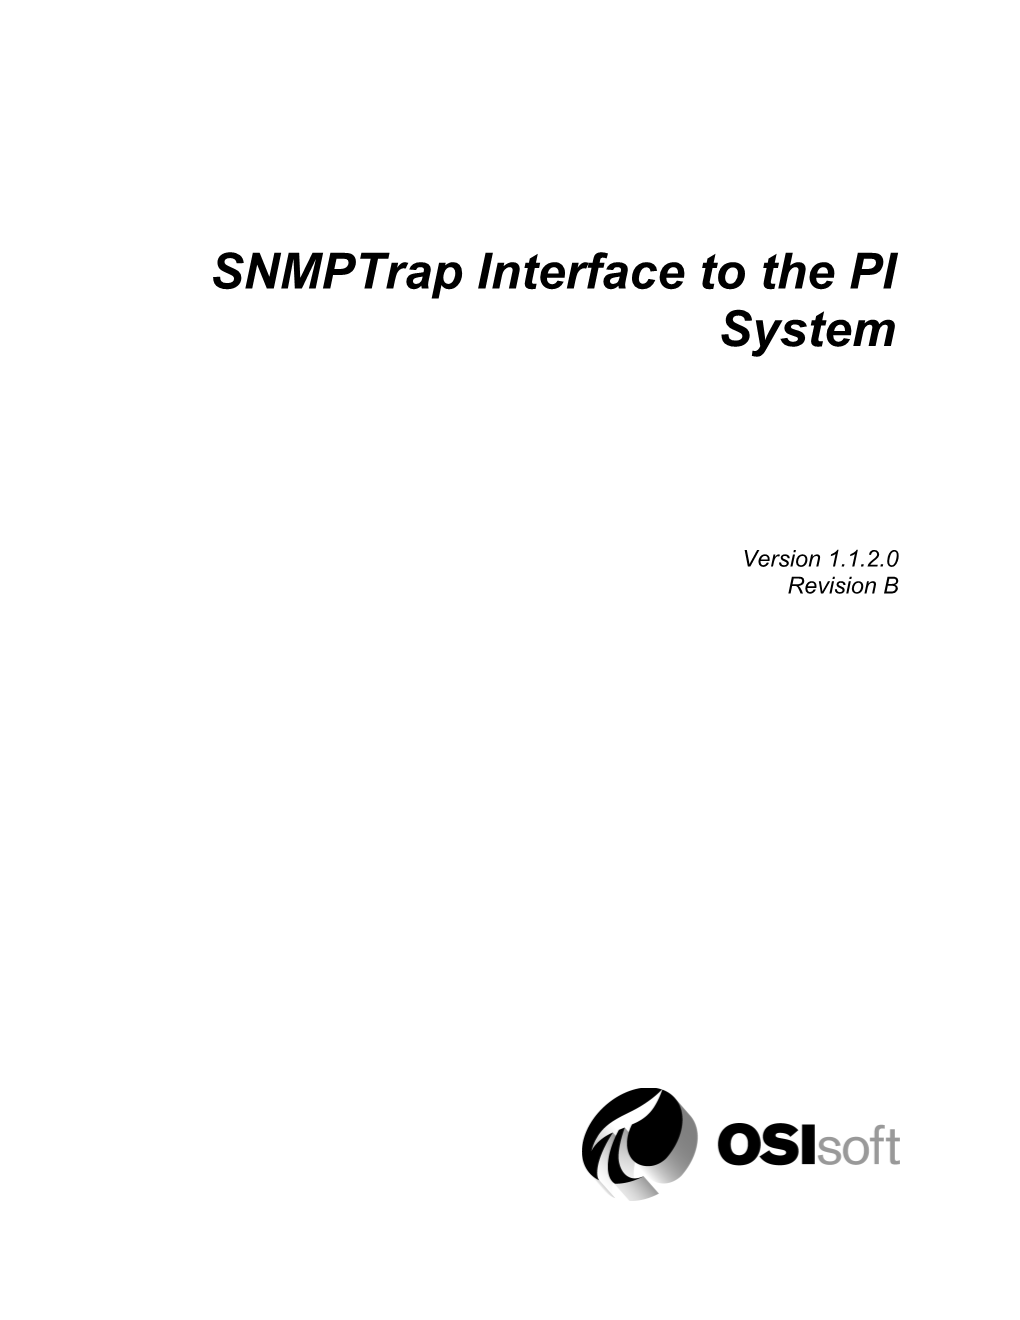 Snmptrap Interface to the PI System